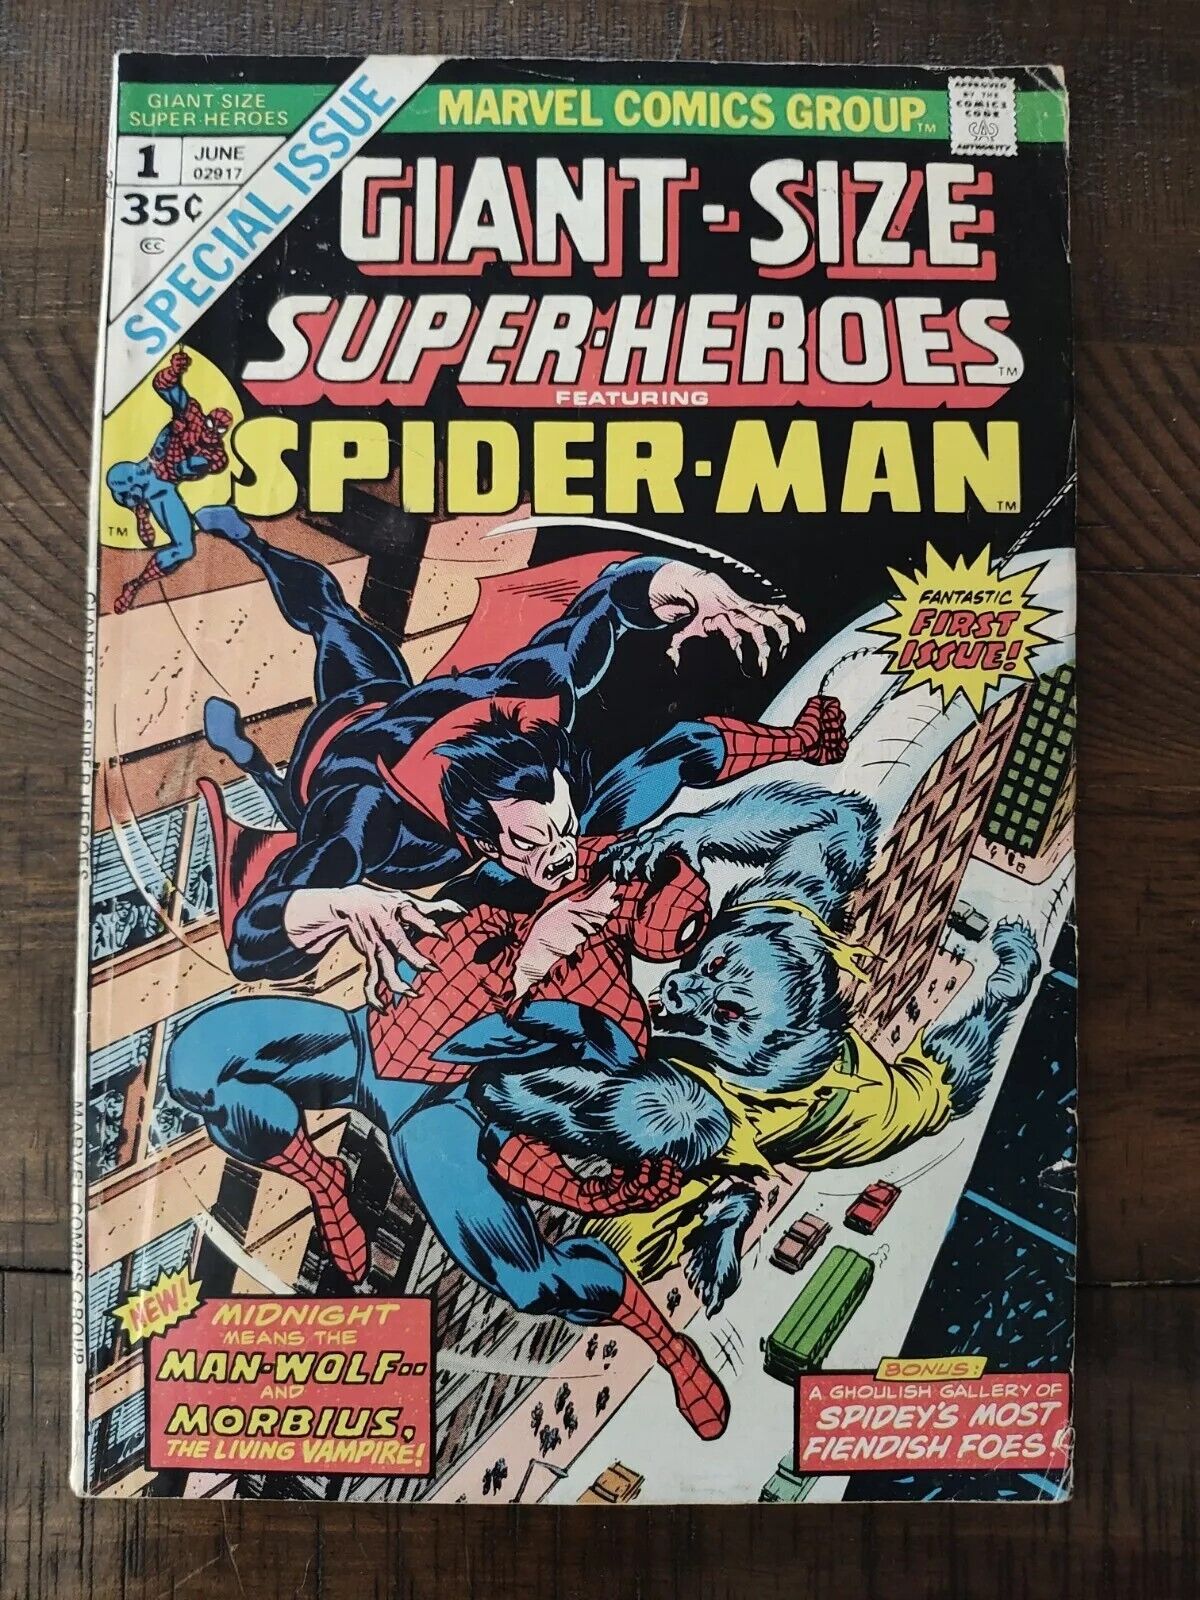 Giant-Size Super-Heroes Spider-Man #1 Great Condition 1st Team Morbius Man-Wolf